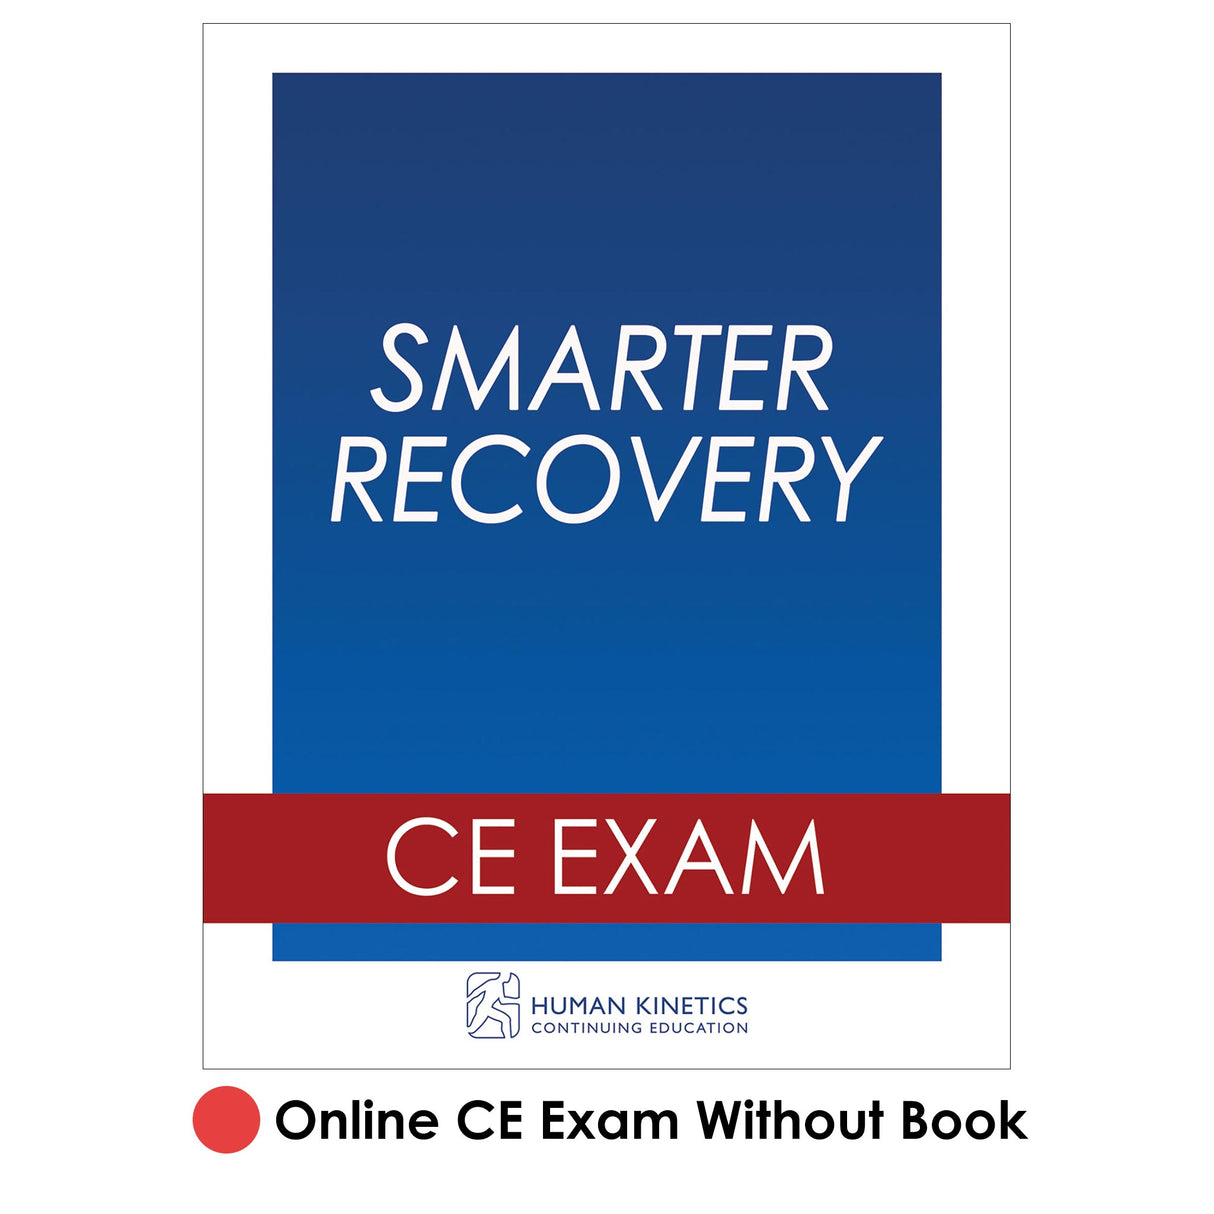 Smarter Recovery Online CE Exam Without Book